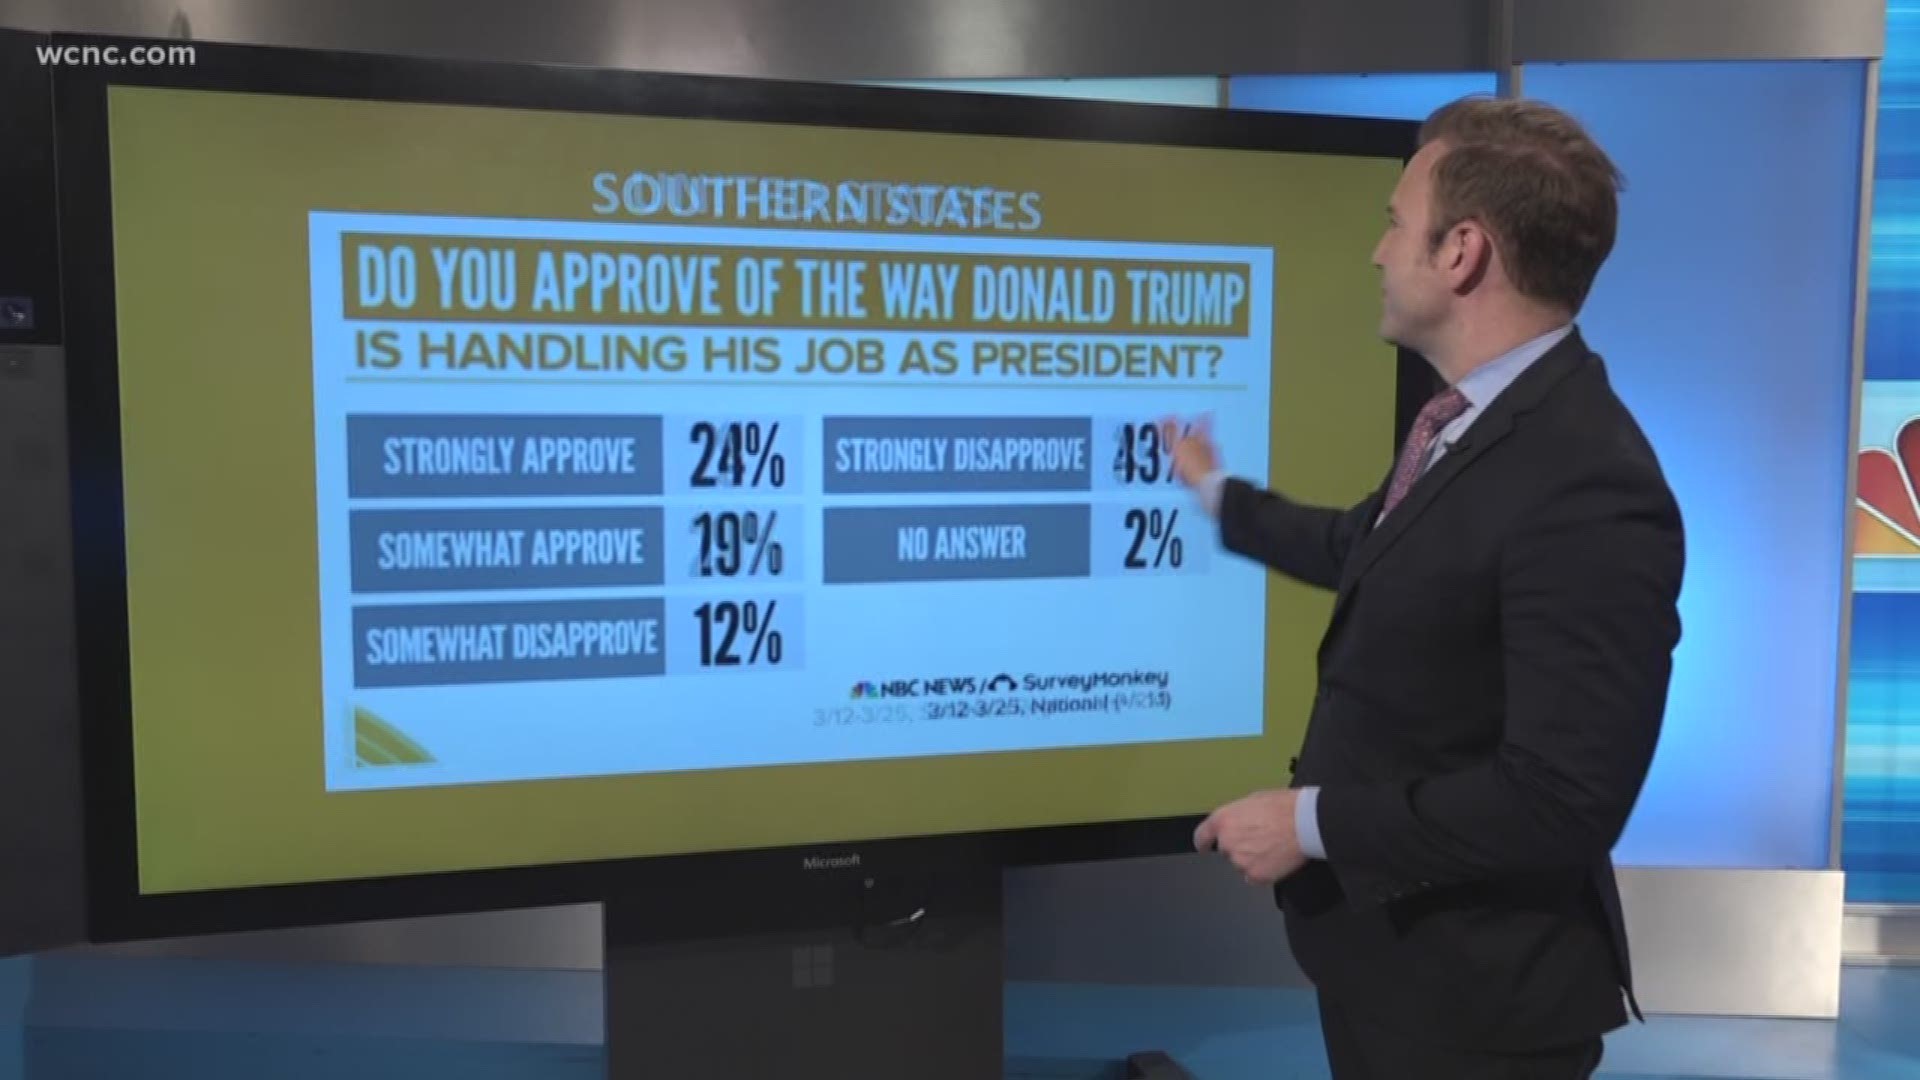 An exclusive poll from NBC News shows that over half of southerners disapprove of how President Trump is handling his job.